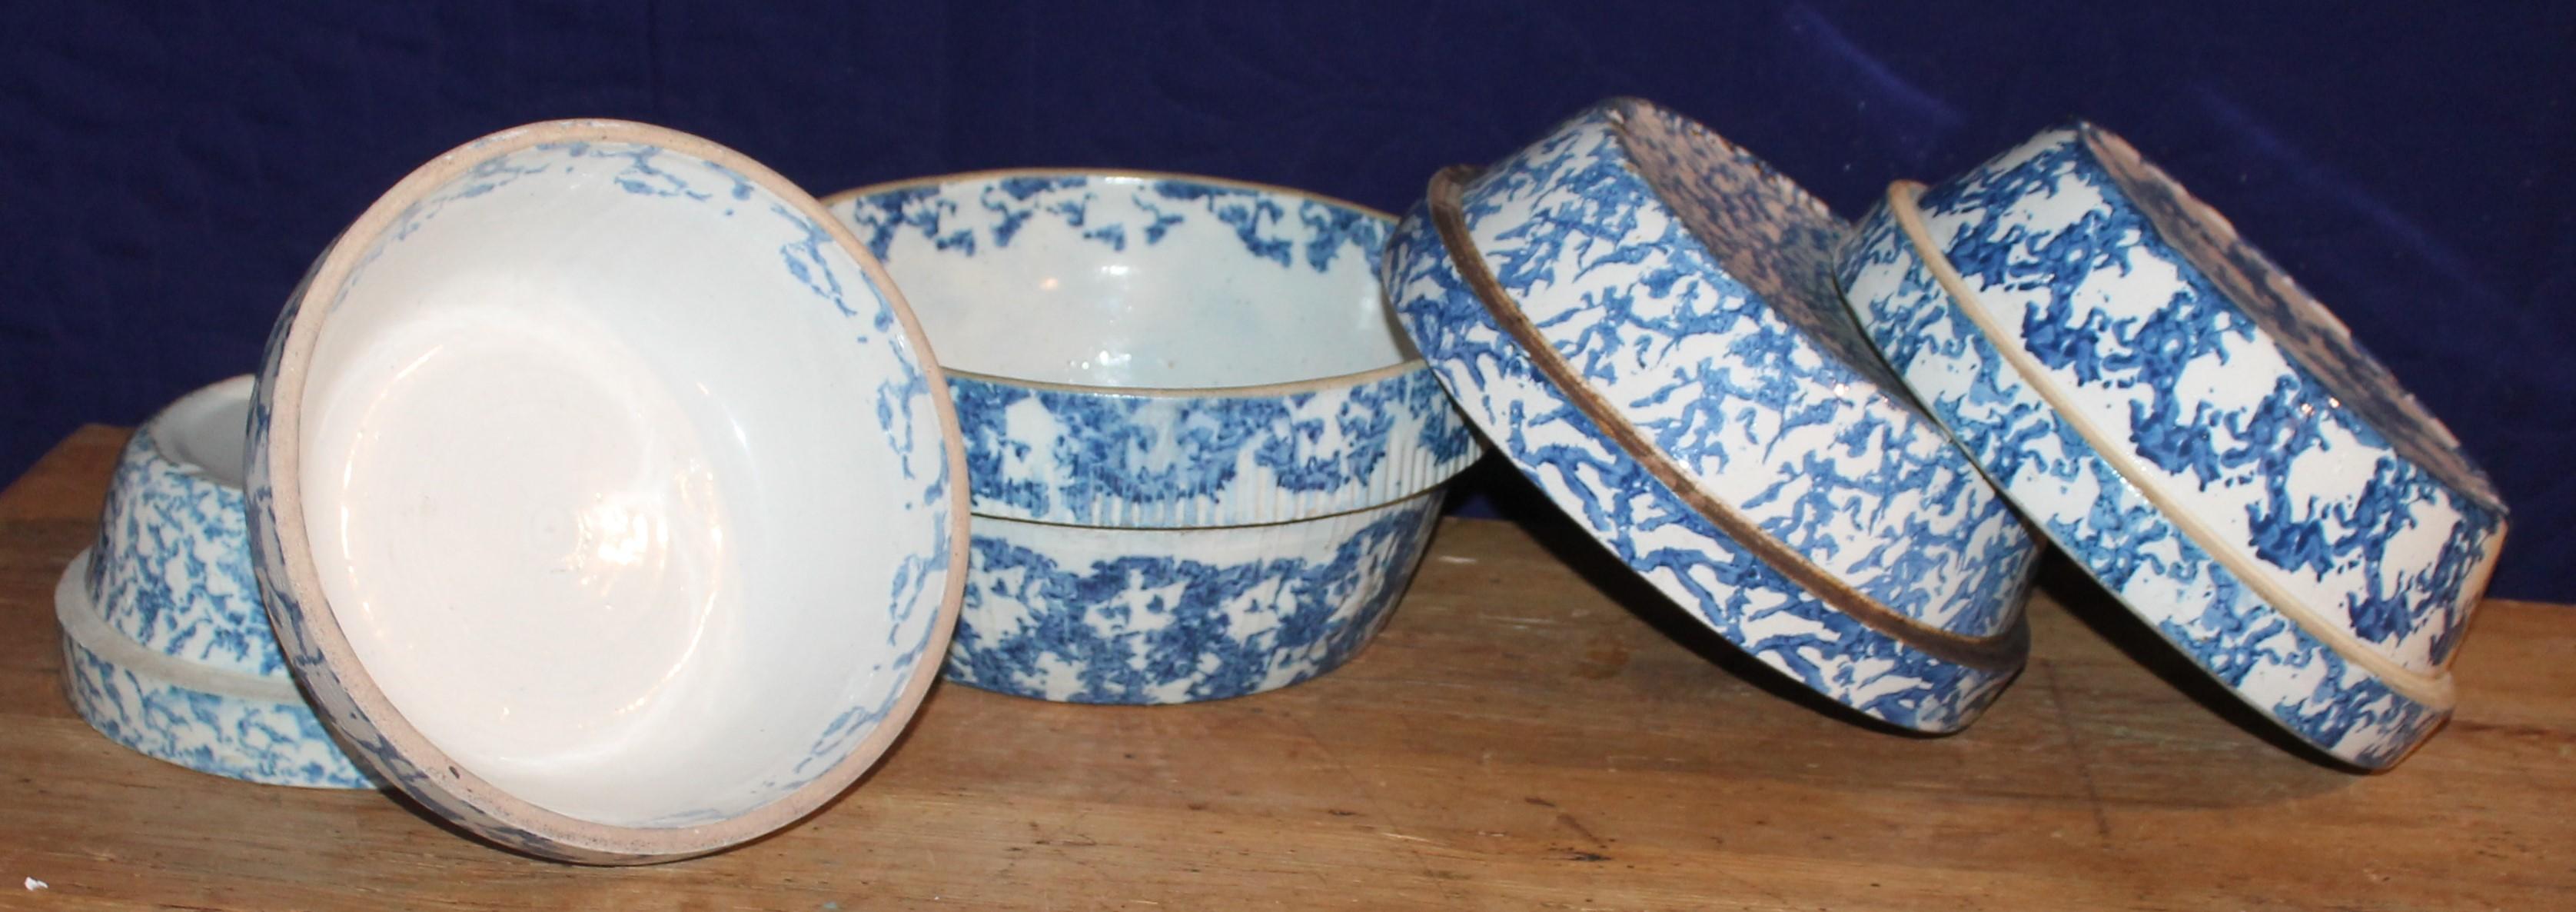 Collection of Five 19th C Spongeware Mixing Bowls. This fine collection of blue spongeware pottery bowls are in good condition and sold as a group.